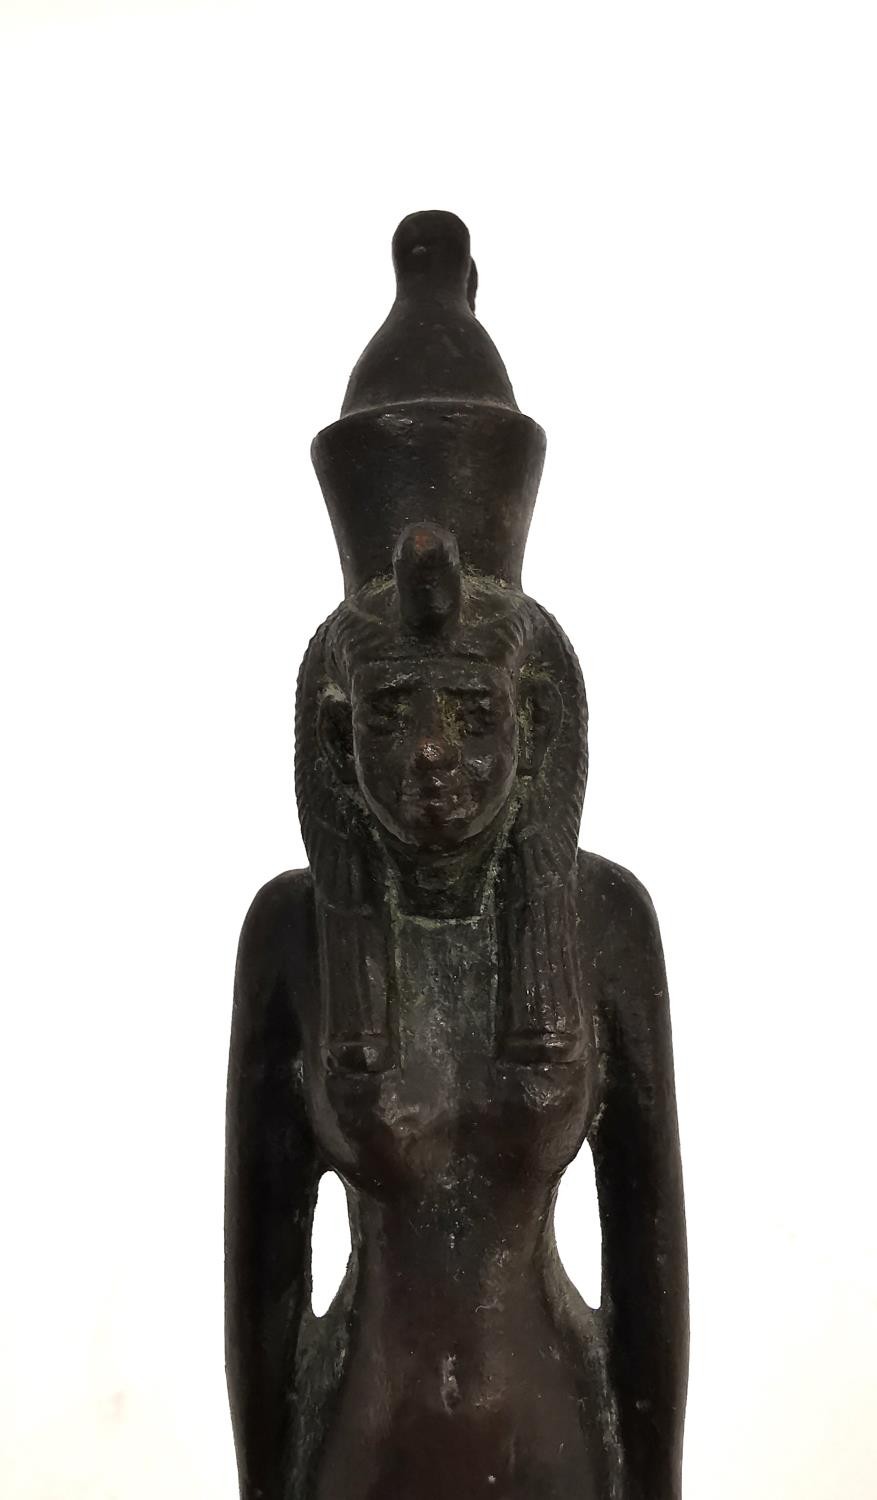 A 19th century Egyptian style bronze statue of an Egyptian god mounted on a wooden stand. H.20cm. - Image 4 of 7